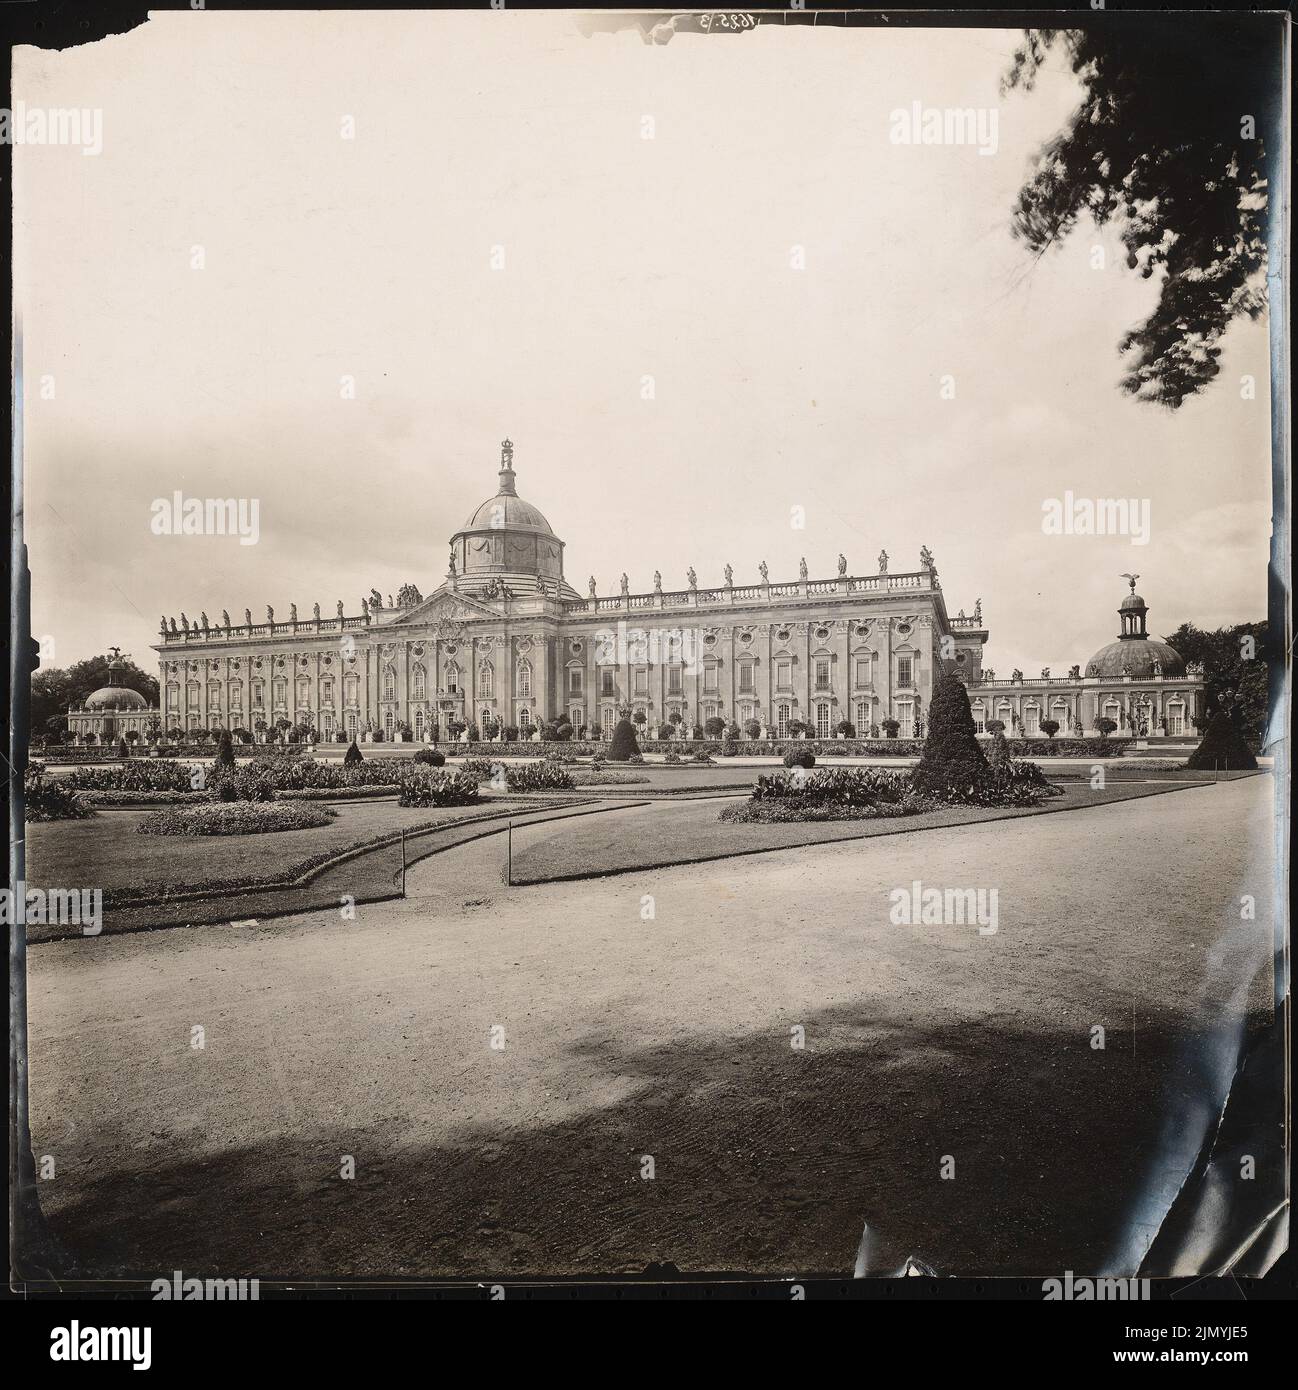 Knobelsdorff Georg Wenzeslaus von (1699-1753), New Palace, Potsdam (1920): View from the garden. Other participating architects: Büring, Manger, Gontard. Photo, 40.4 x 40.4 cm (including scan edges) Stock Photo